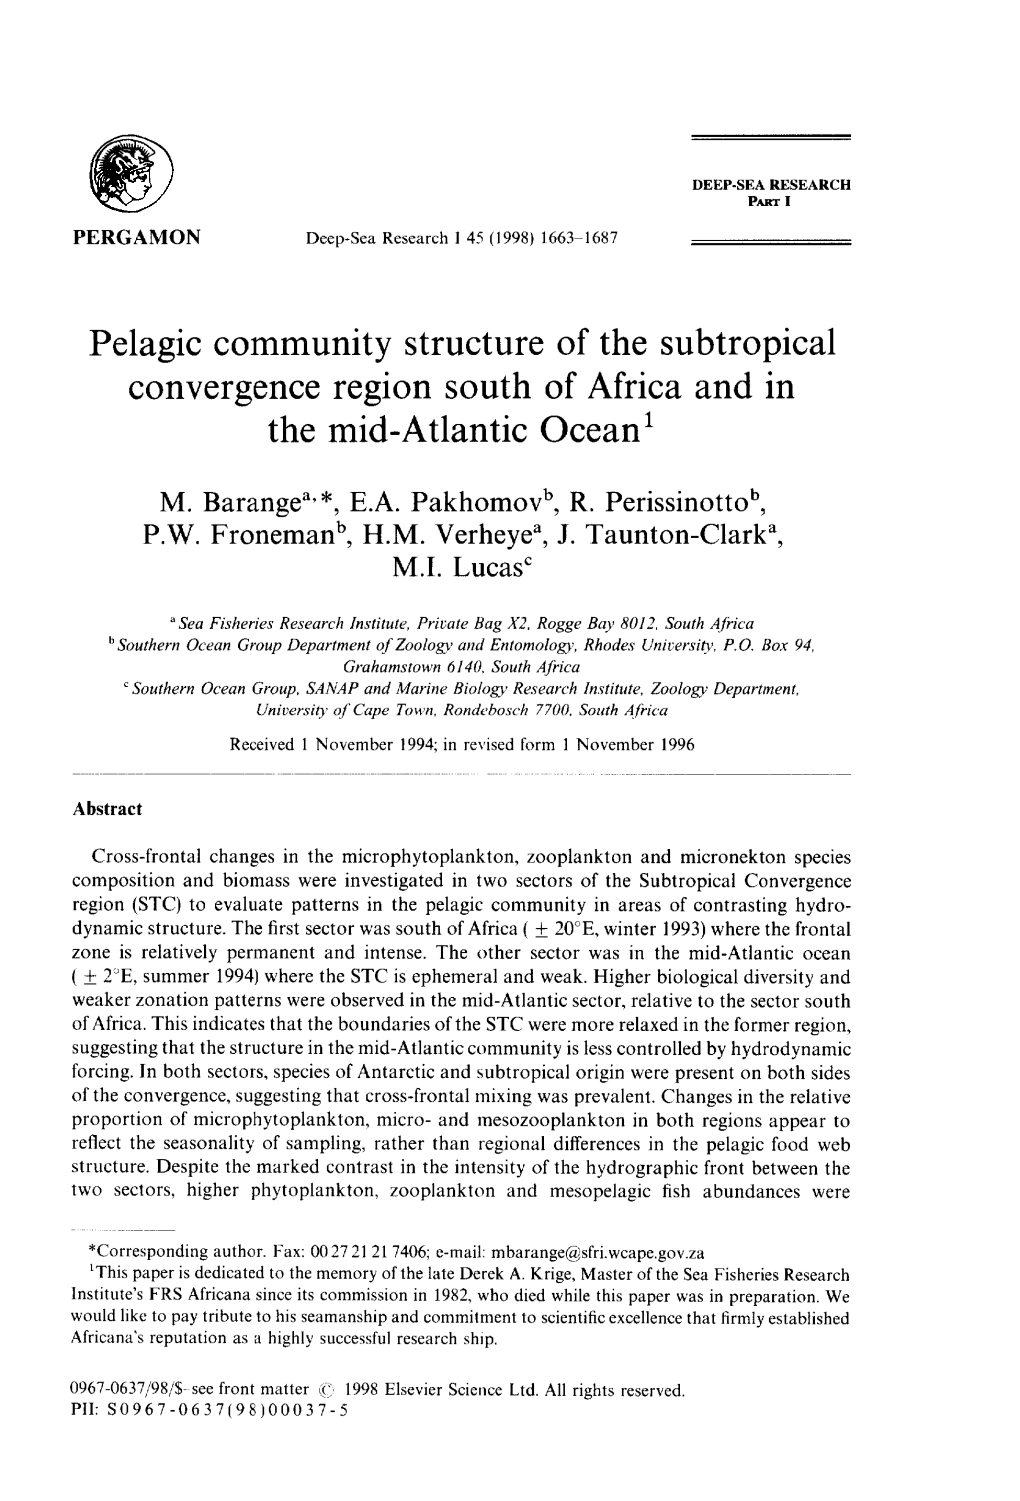 Pelagic Community Structure of the Subtropical Convergence Region South of Africa and in the Mid-Atlantic Ocean1